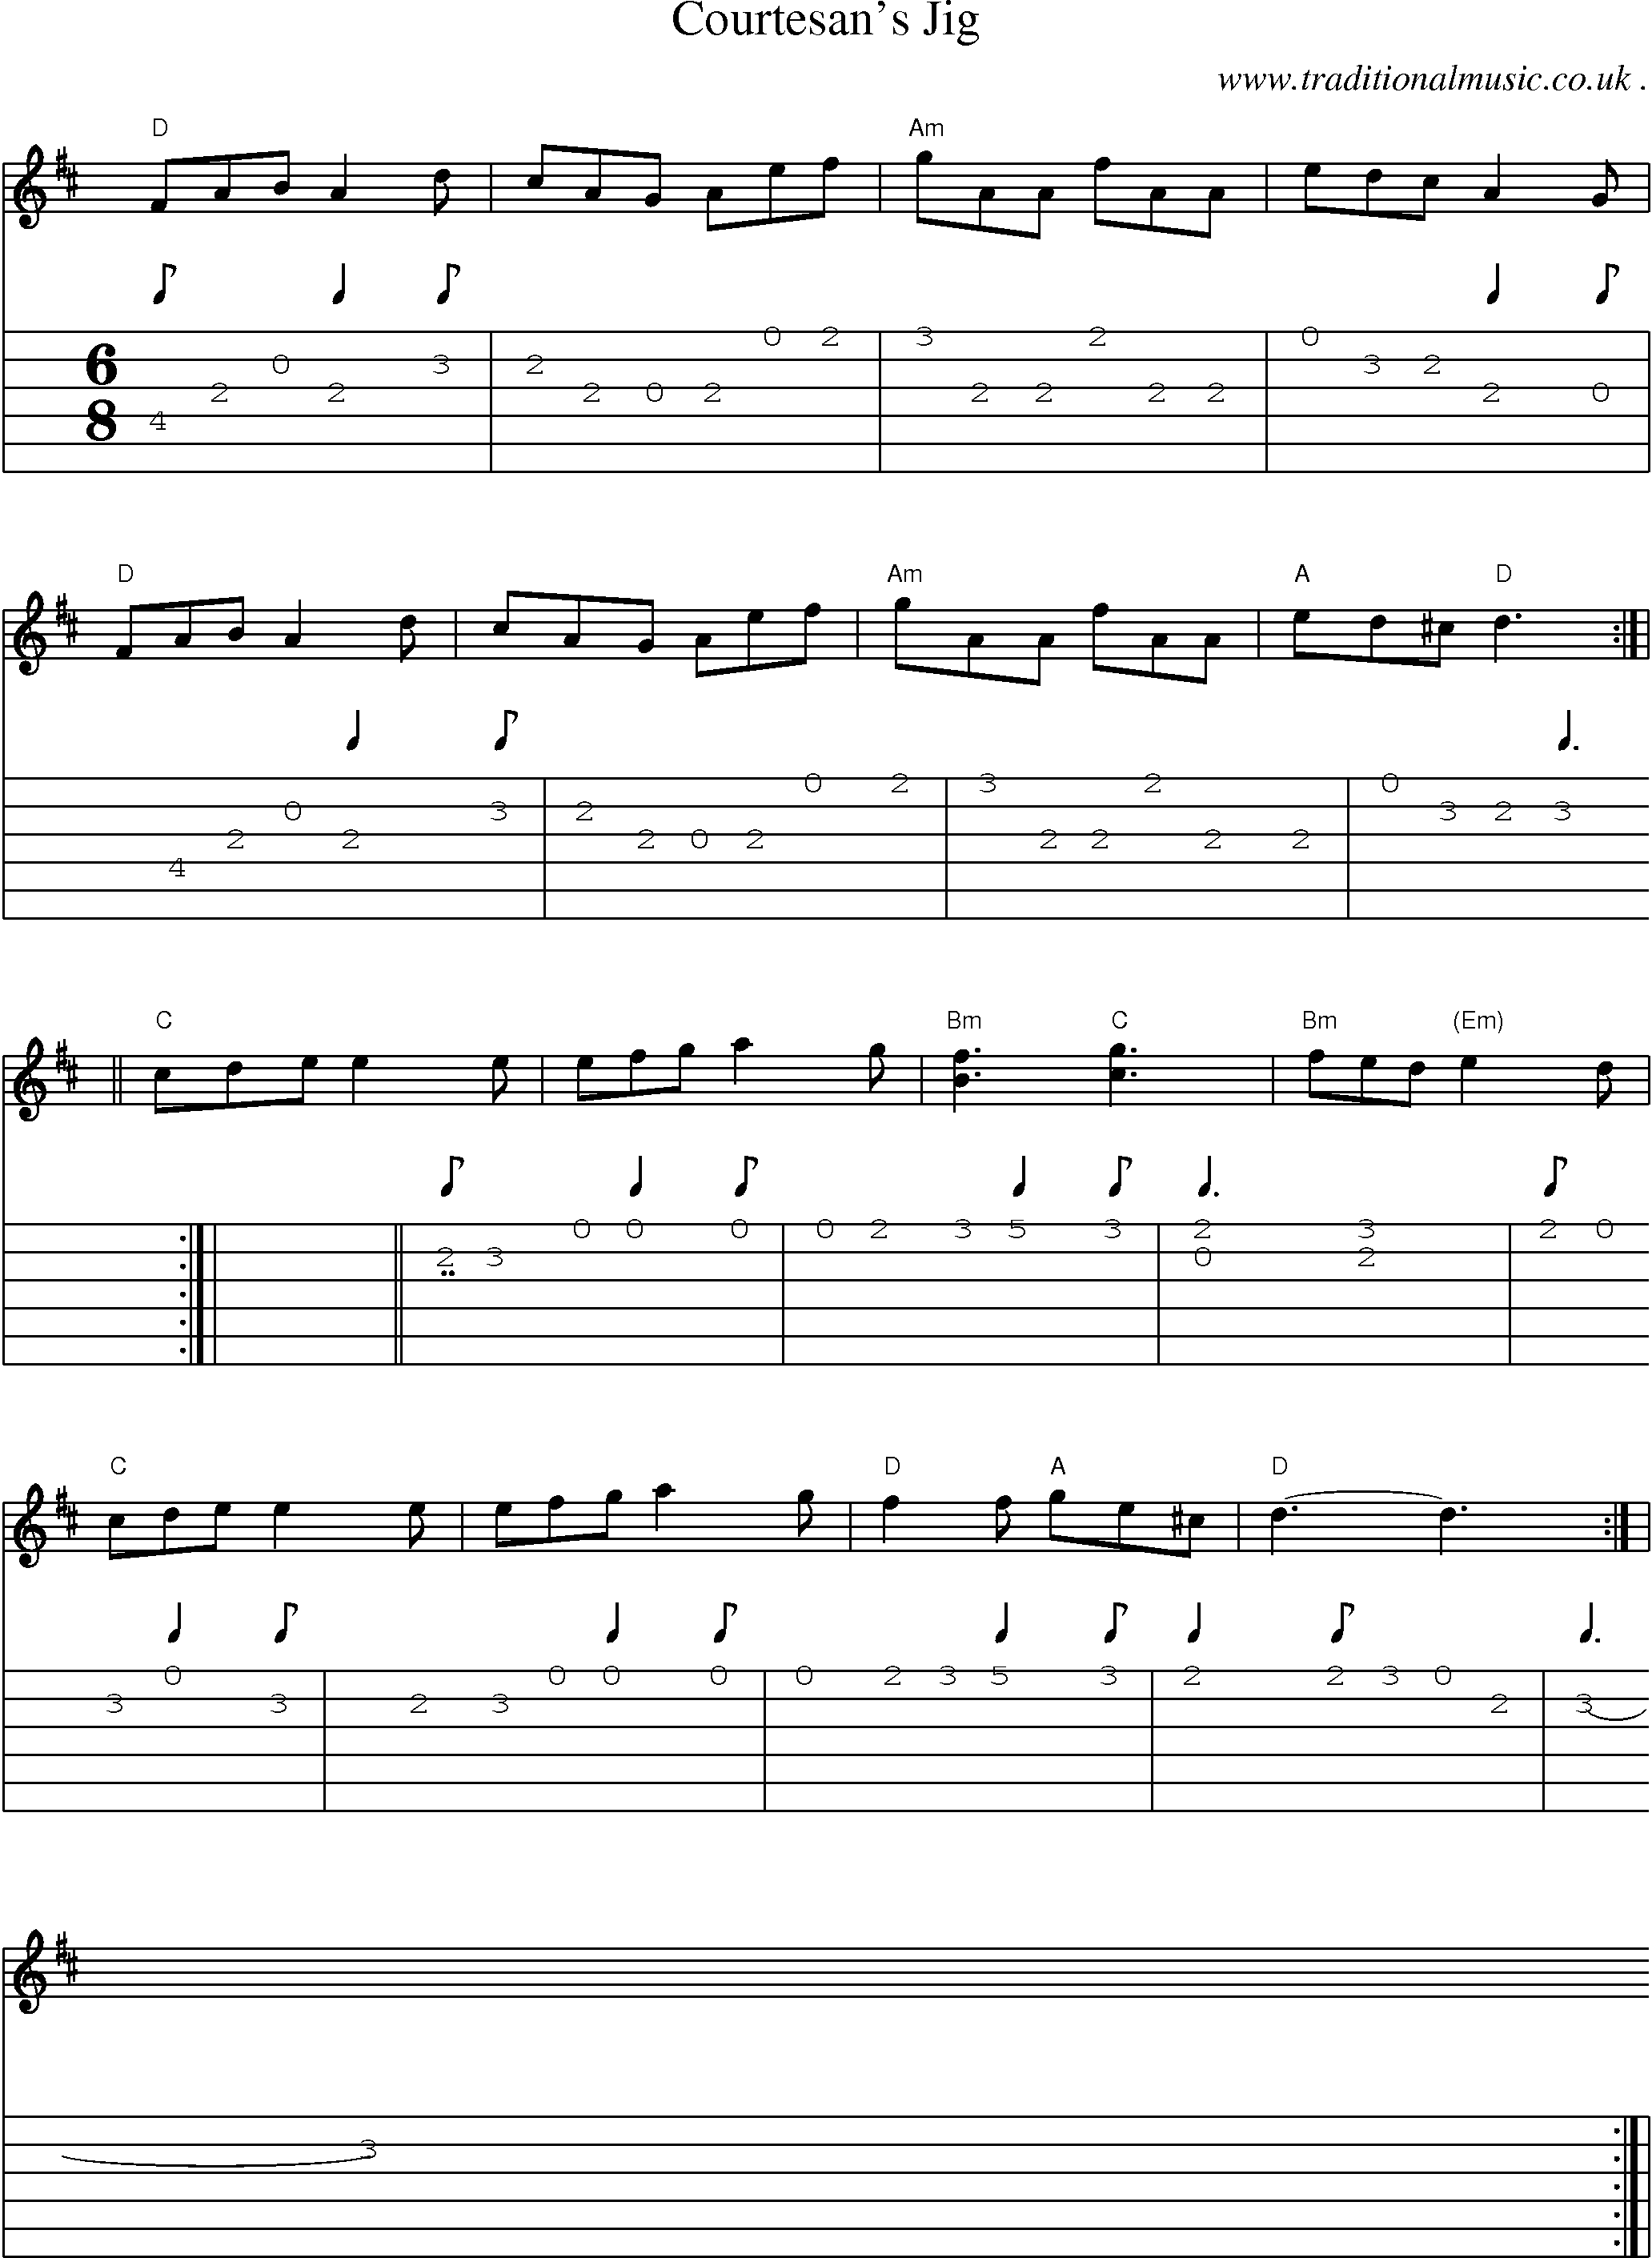 Sheet-music  score, Chords and Guitar Tabs for Courtesans Jig